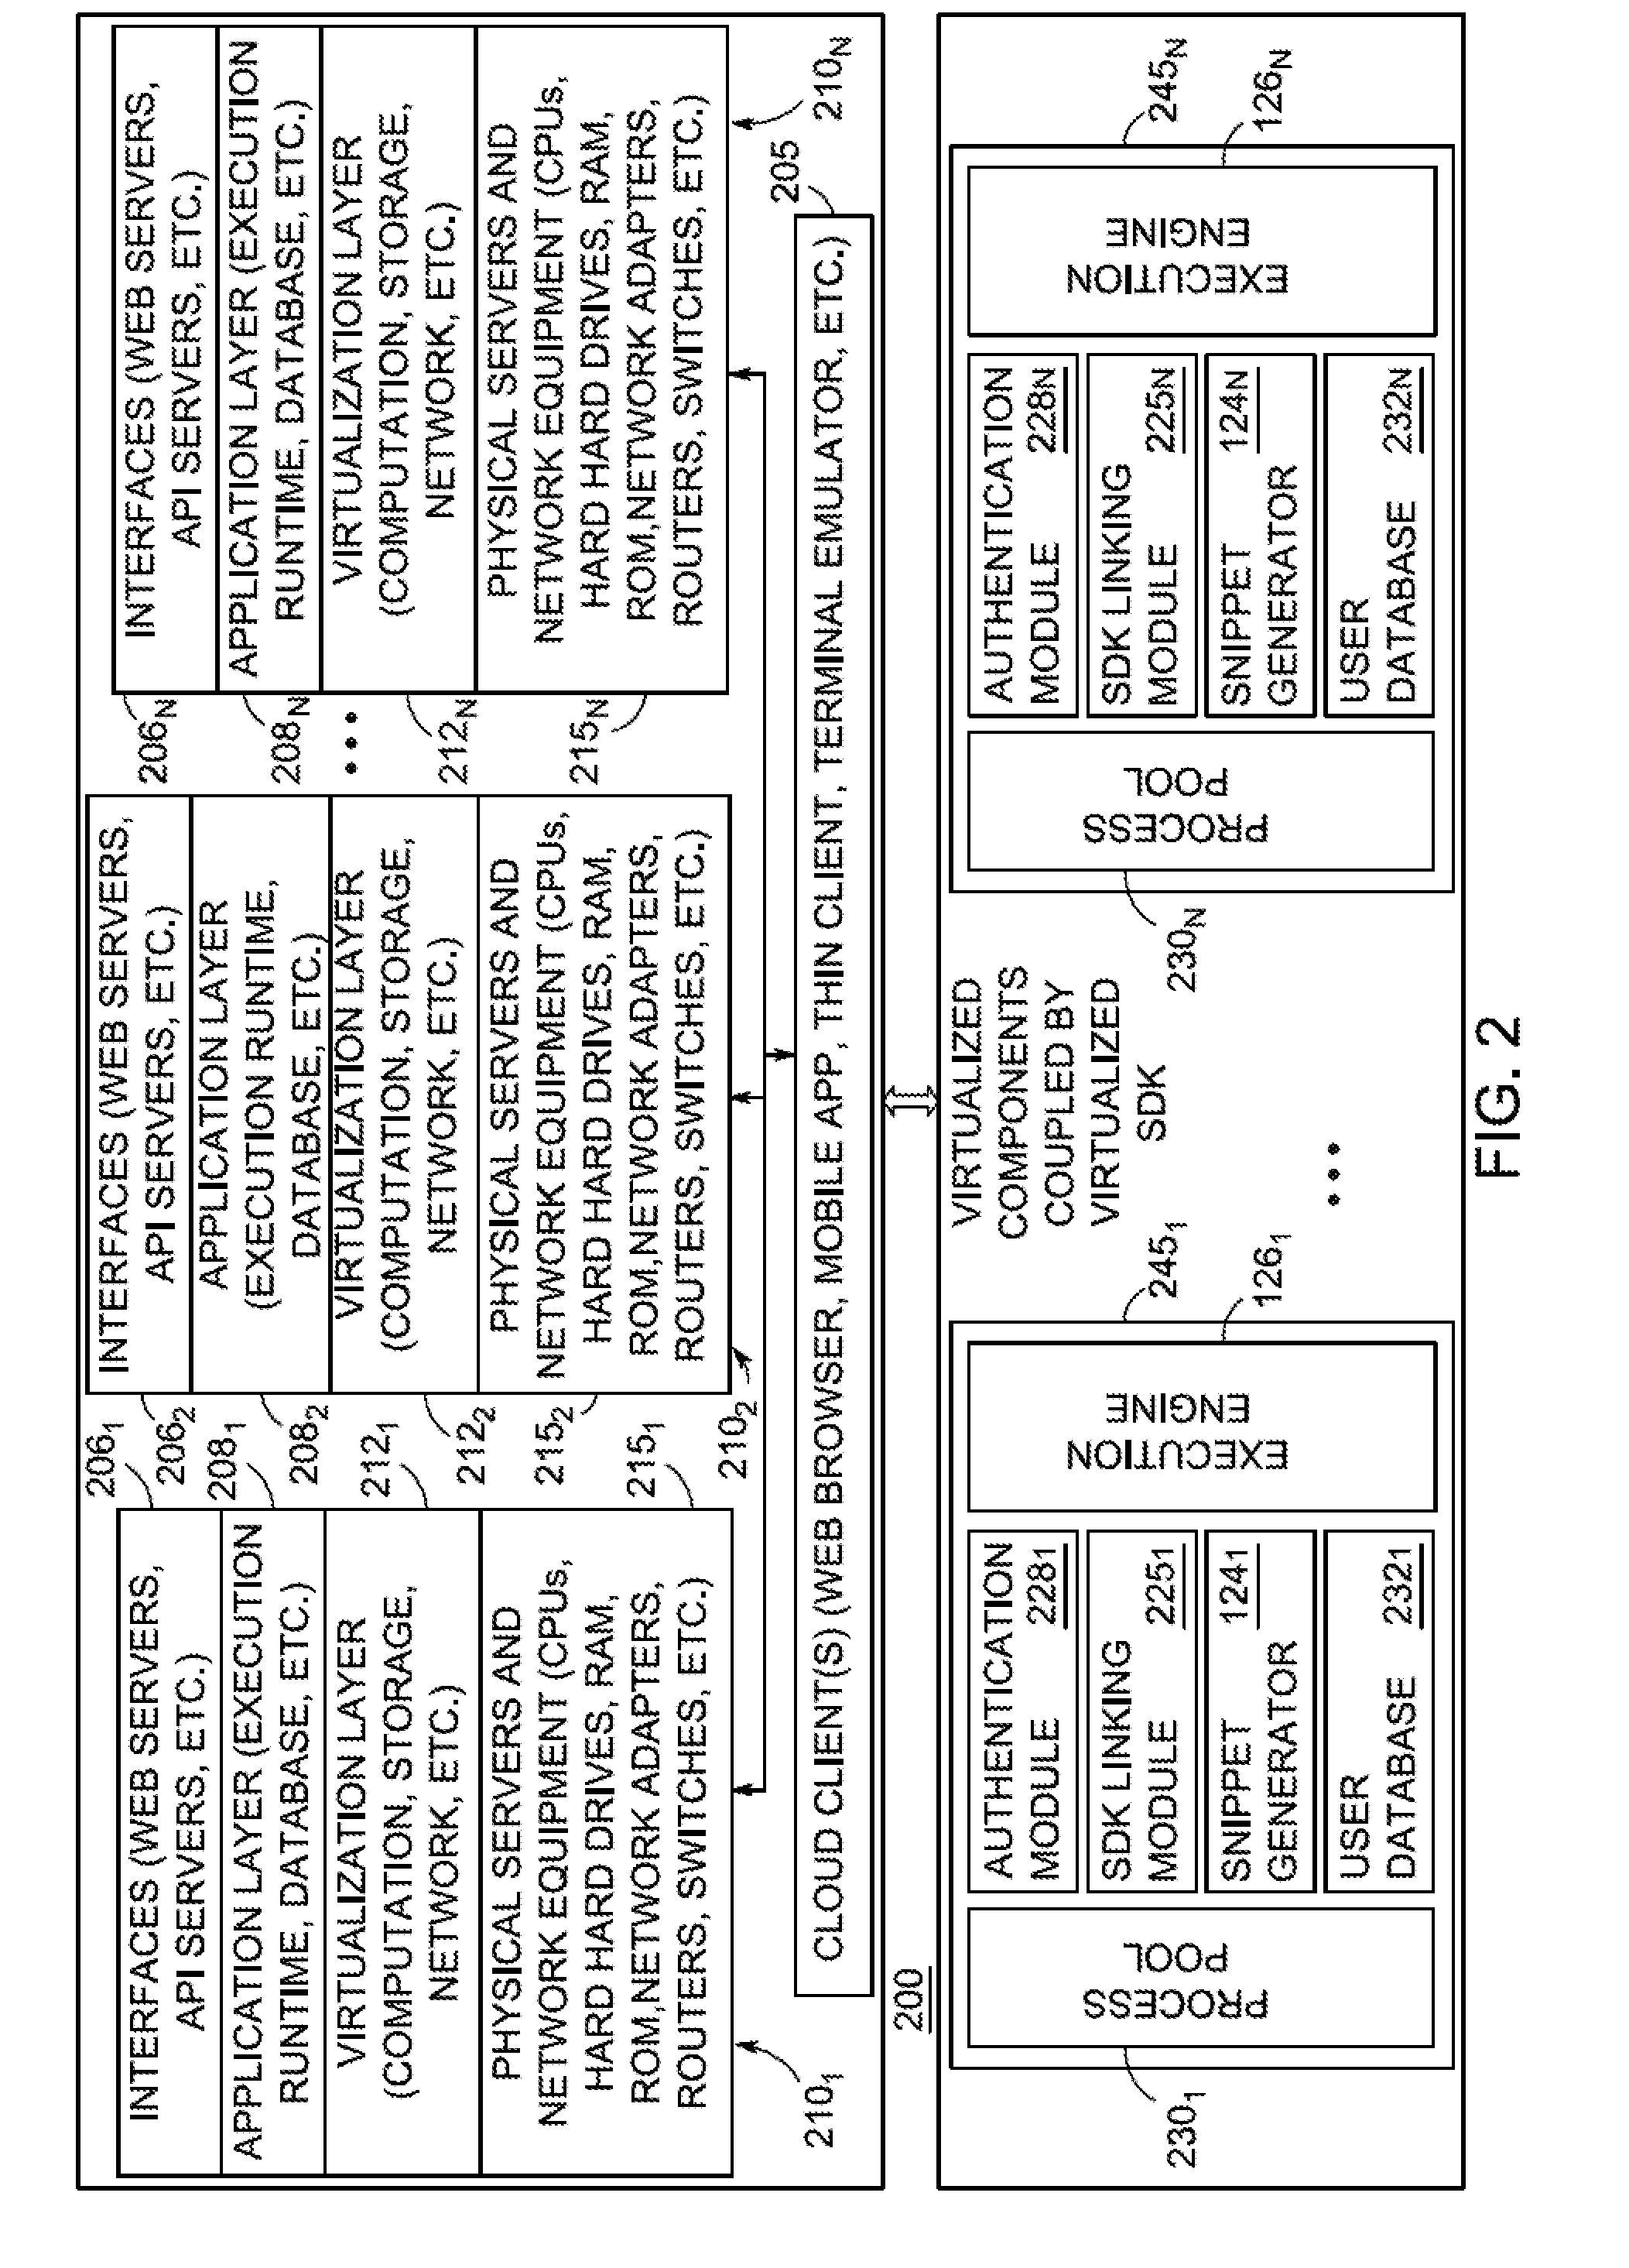 Method and apparatus for code virtualization and remote process call generation